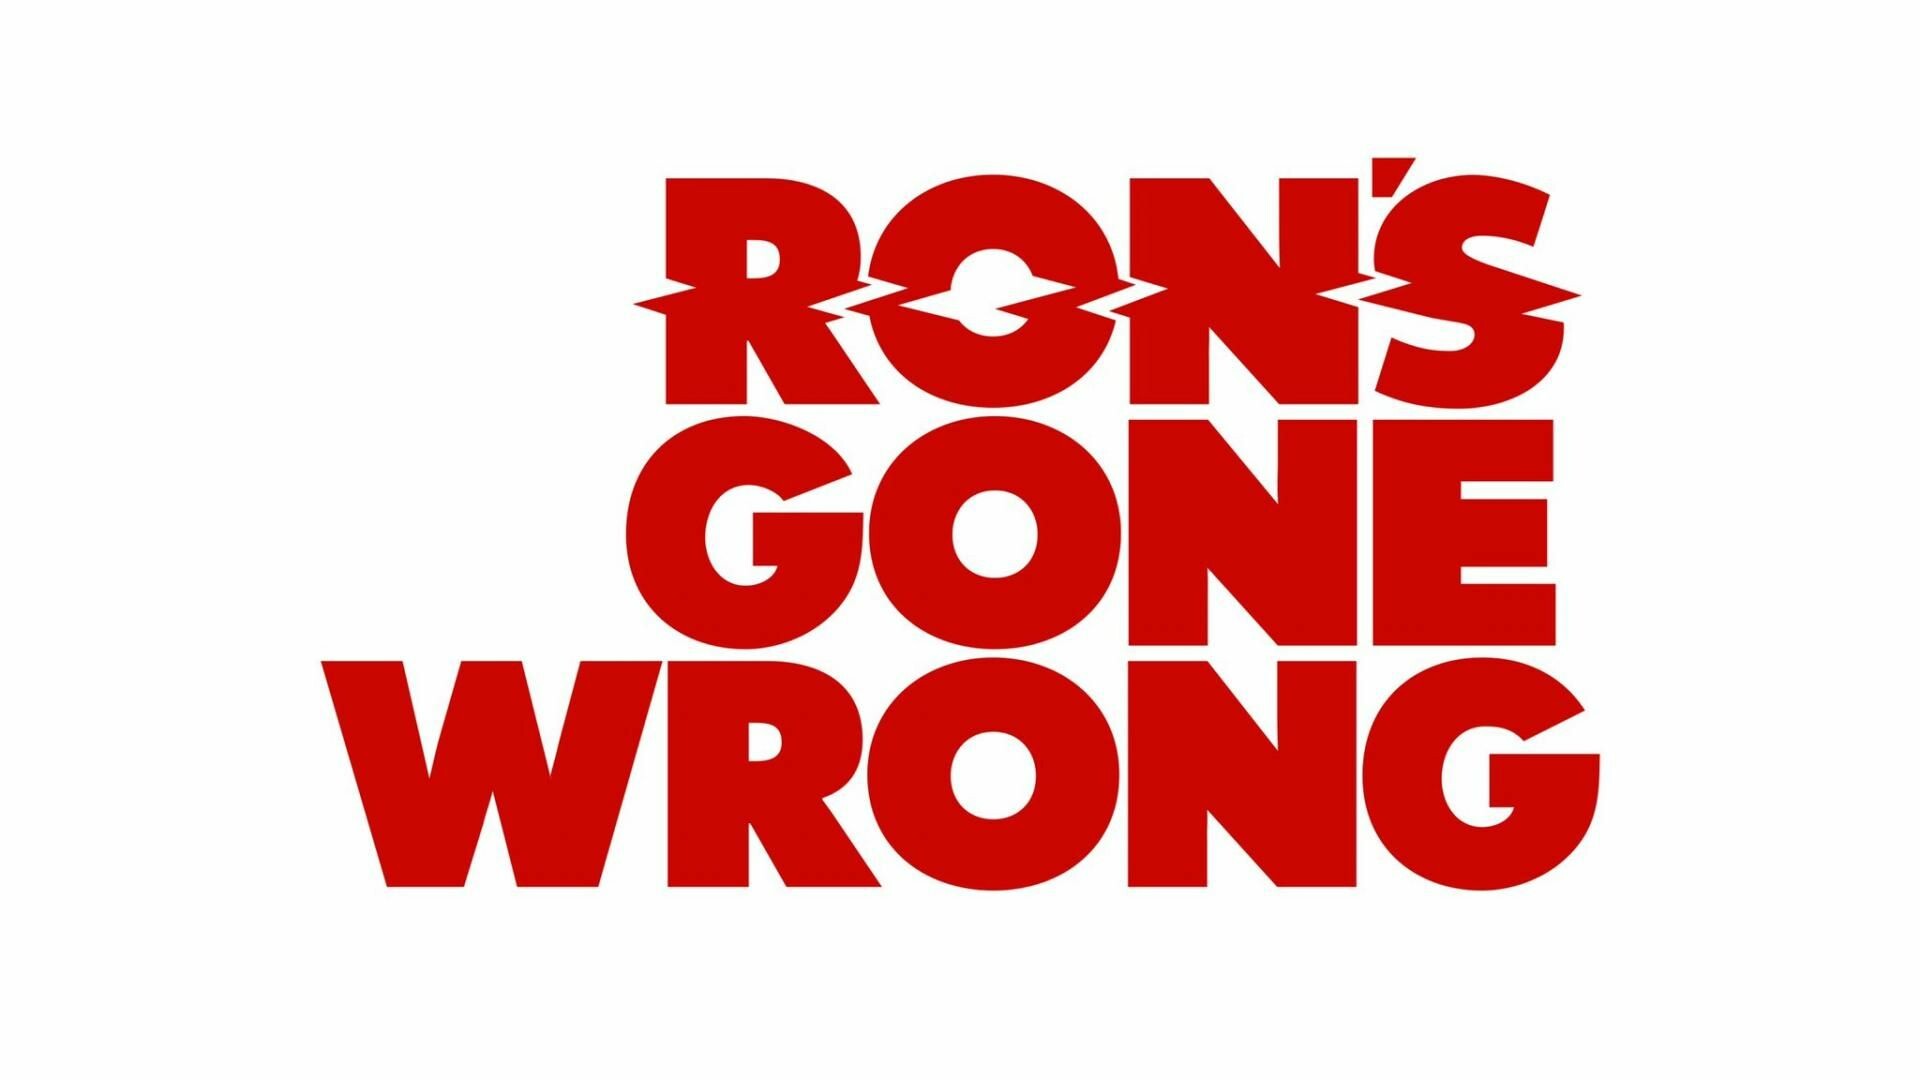 Ron's Gone Wrong: The debut feature of Locksmith Animation, Animated by DNEG Animation. 1920x1080 Full HD Wallpaper.